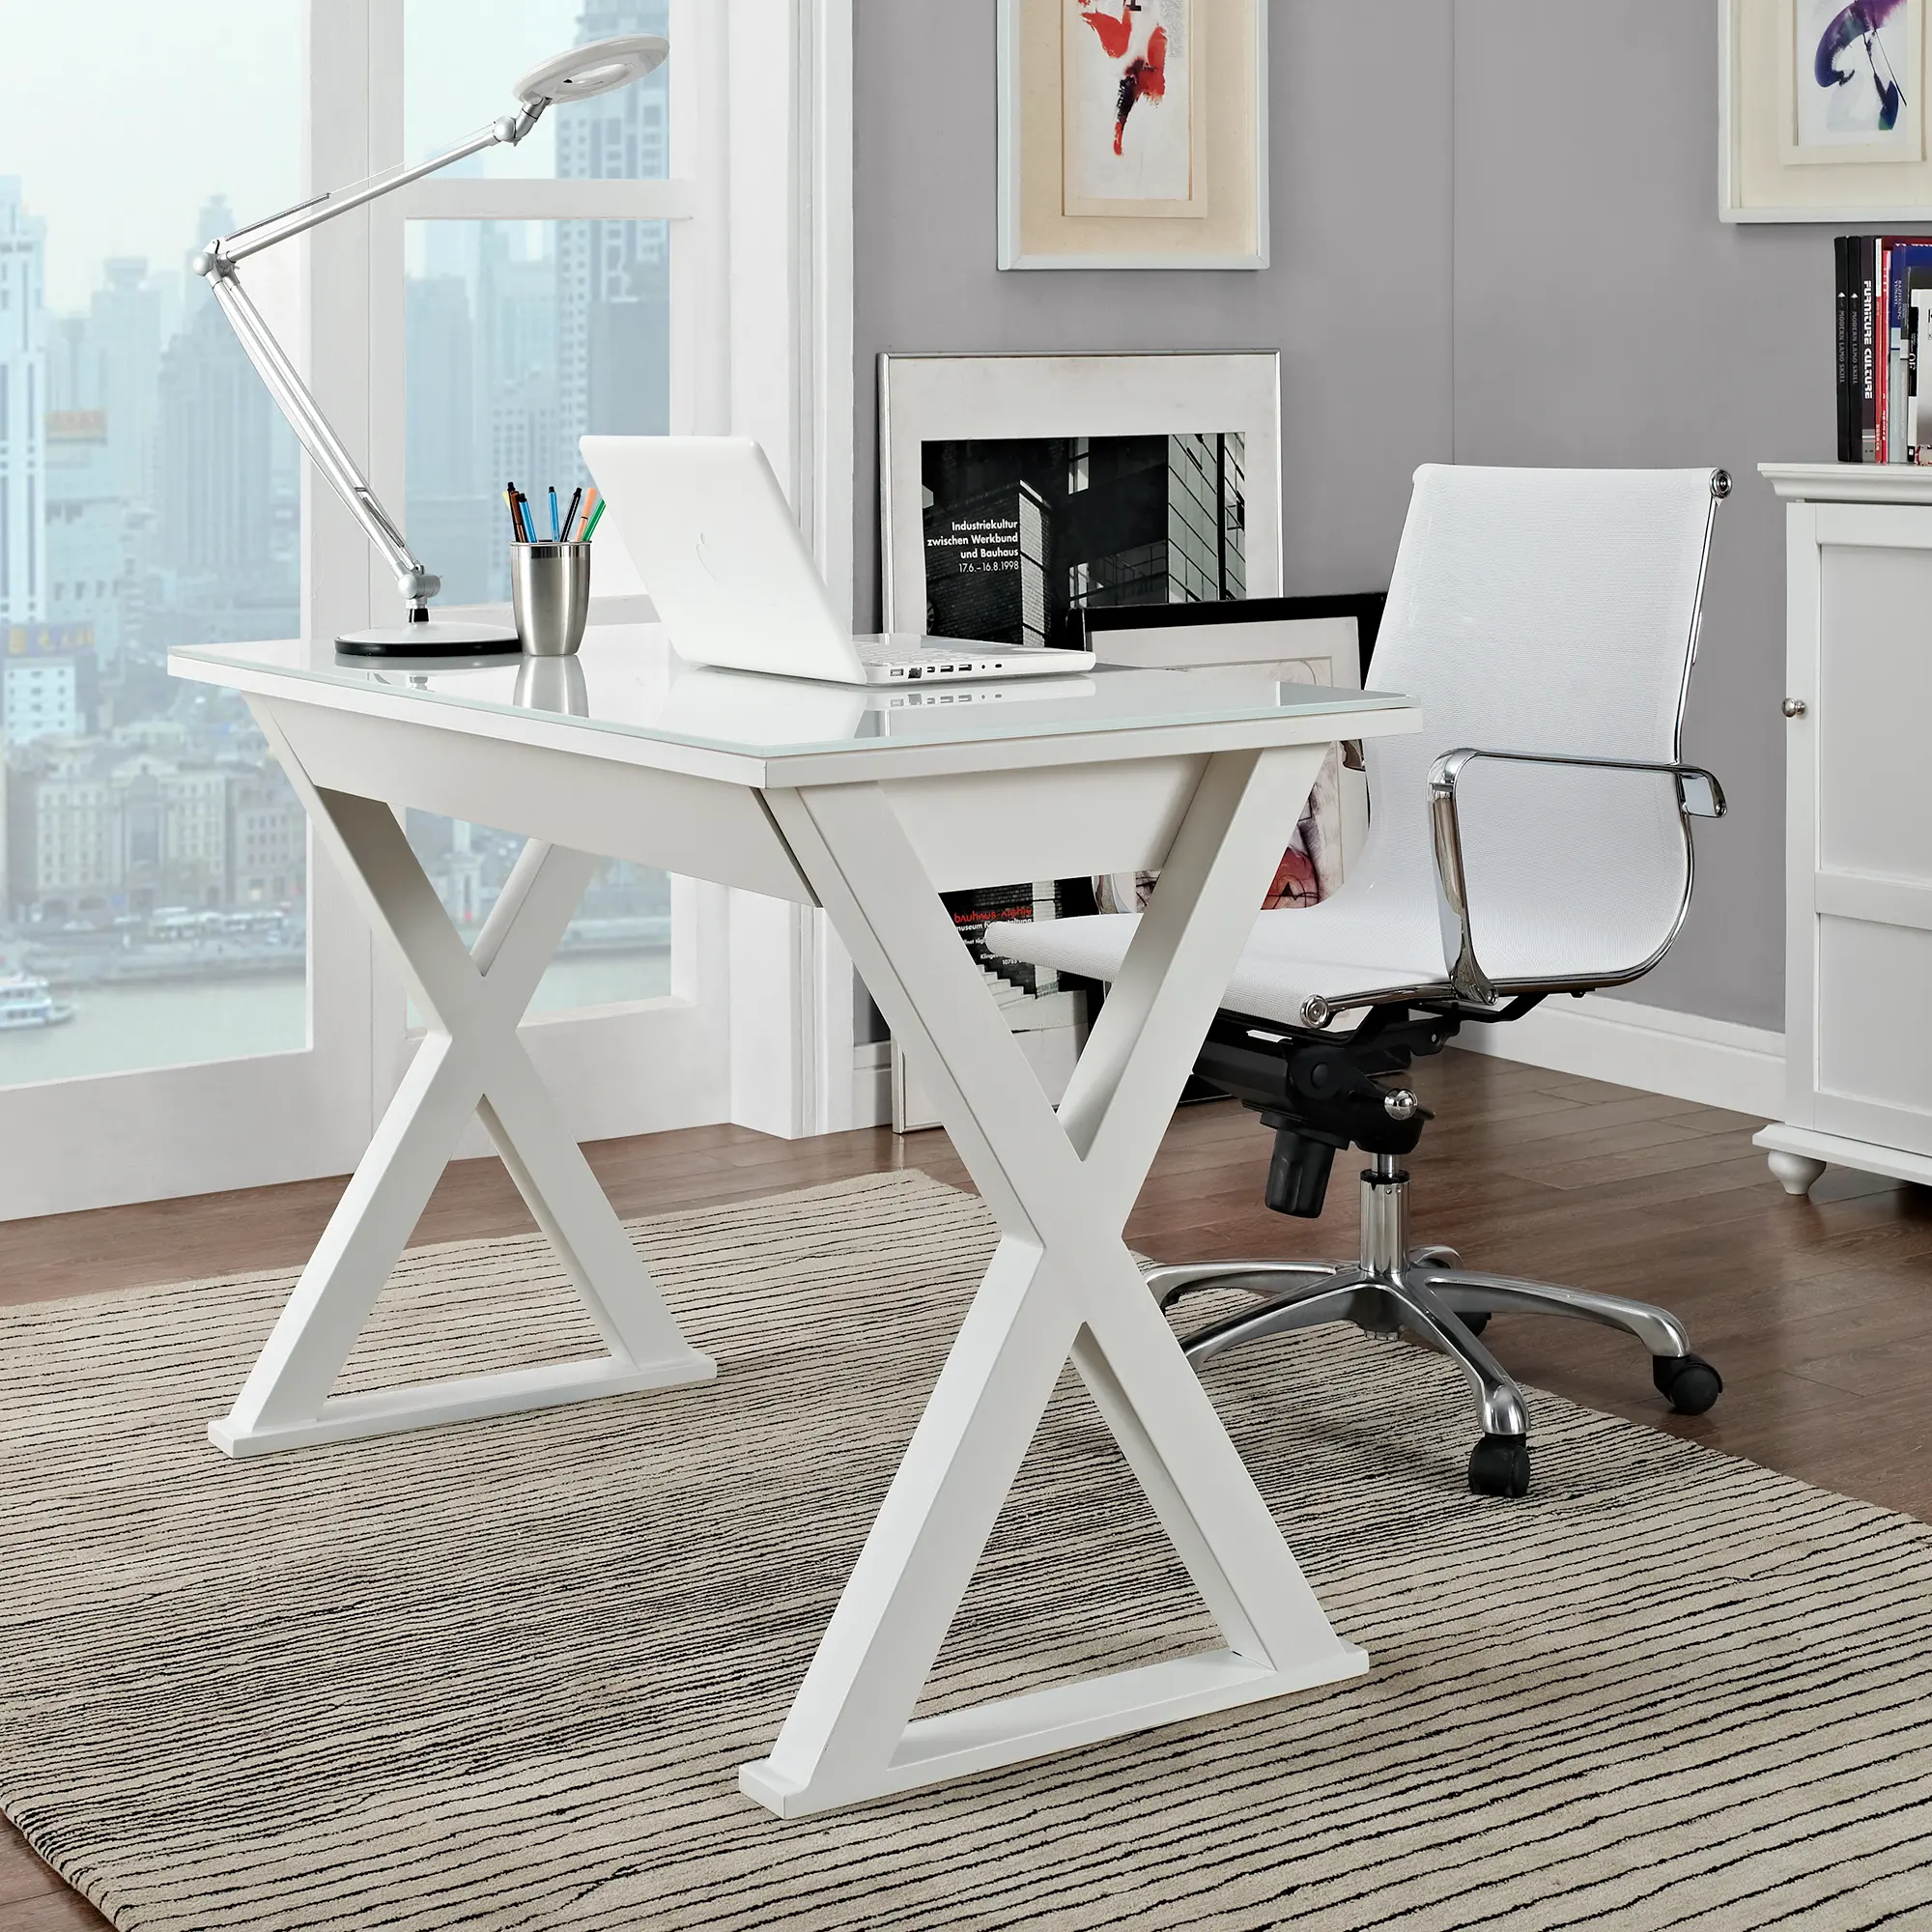 https://static.rcwilley.com/products/111270847/White-48-Inch-Metal-and-Glass-Desk---Walker-Edison-rcwilley-image1.webp